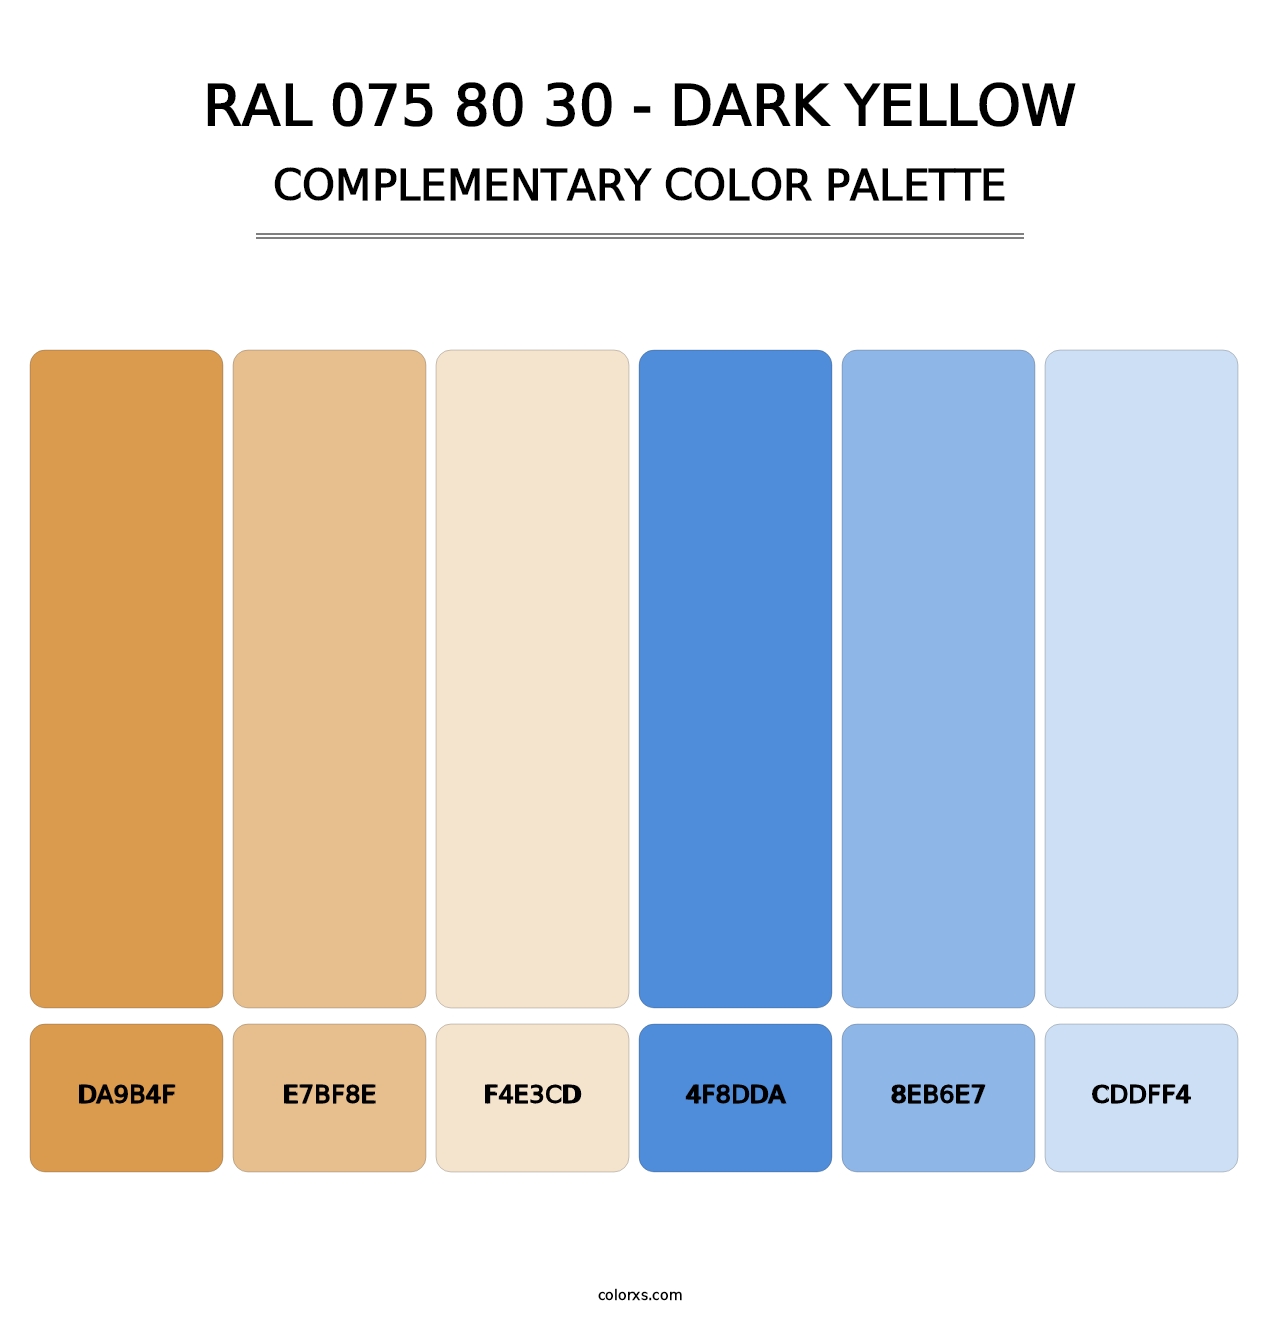 RAL 075 80 30 - Dark Yellow - Complementary Color Palette